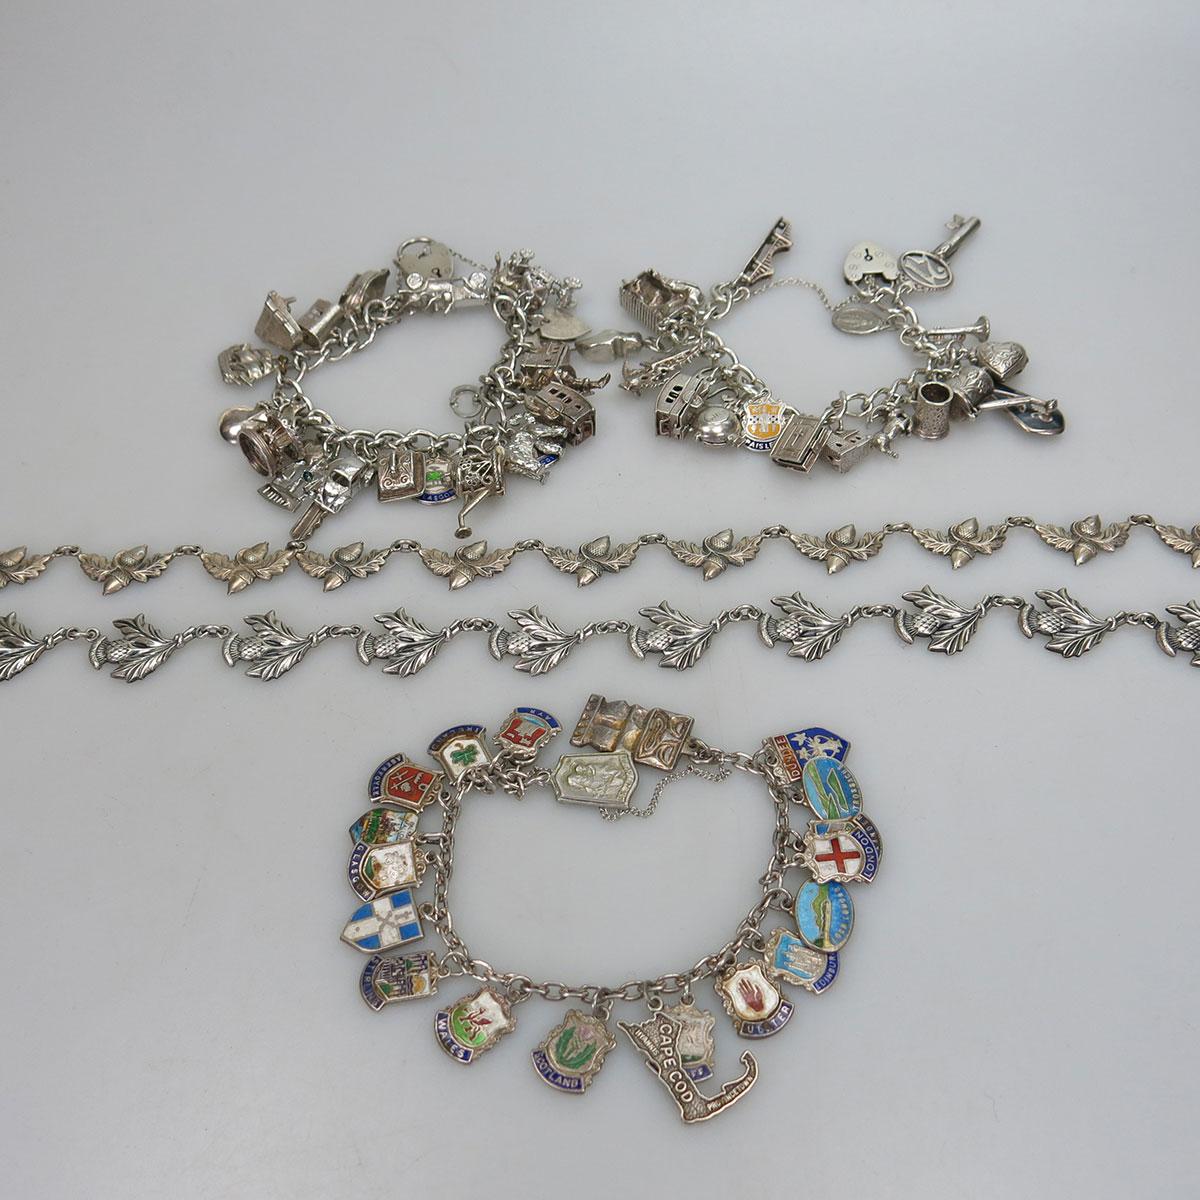 Small Quantity Of Silver Charm Bracelets And Charms